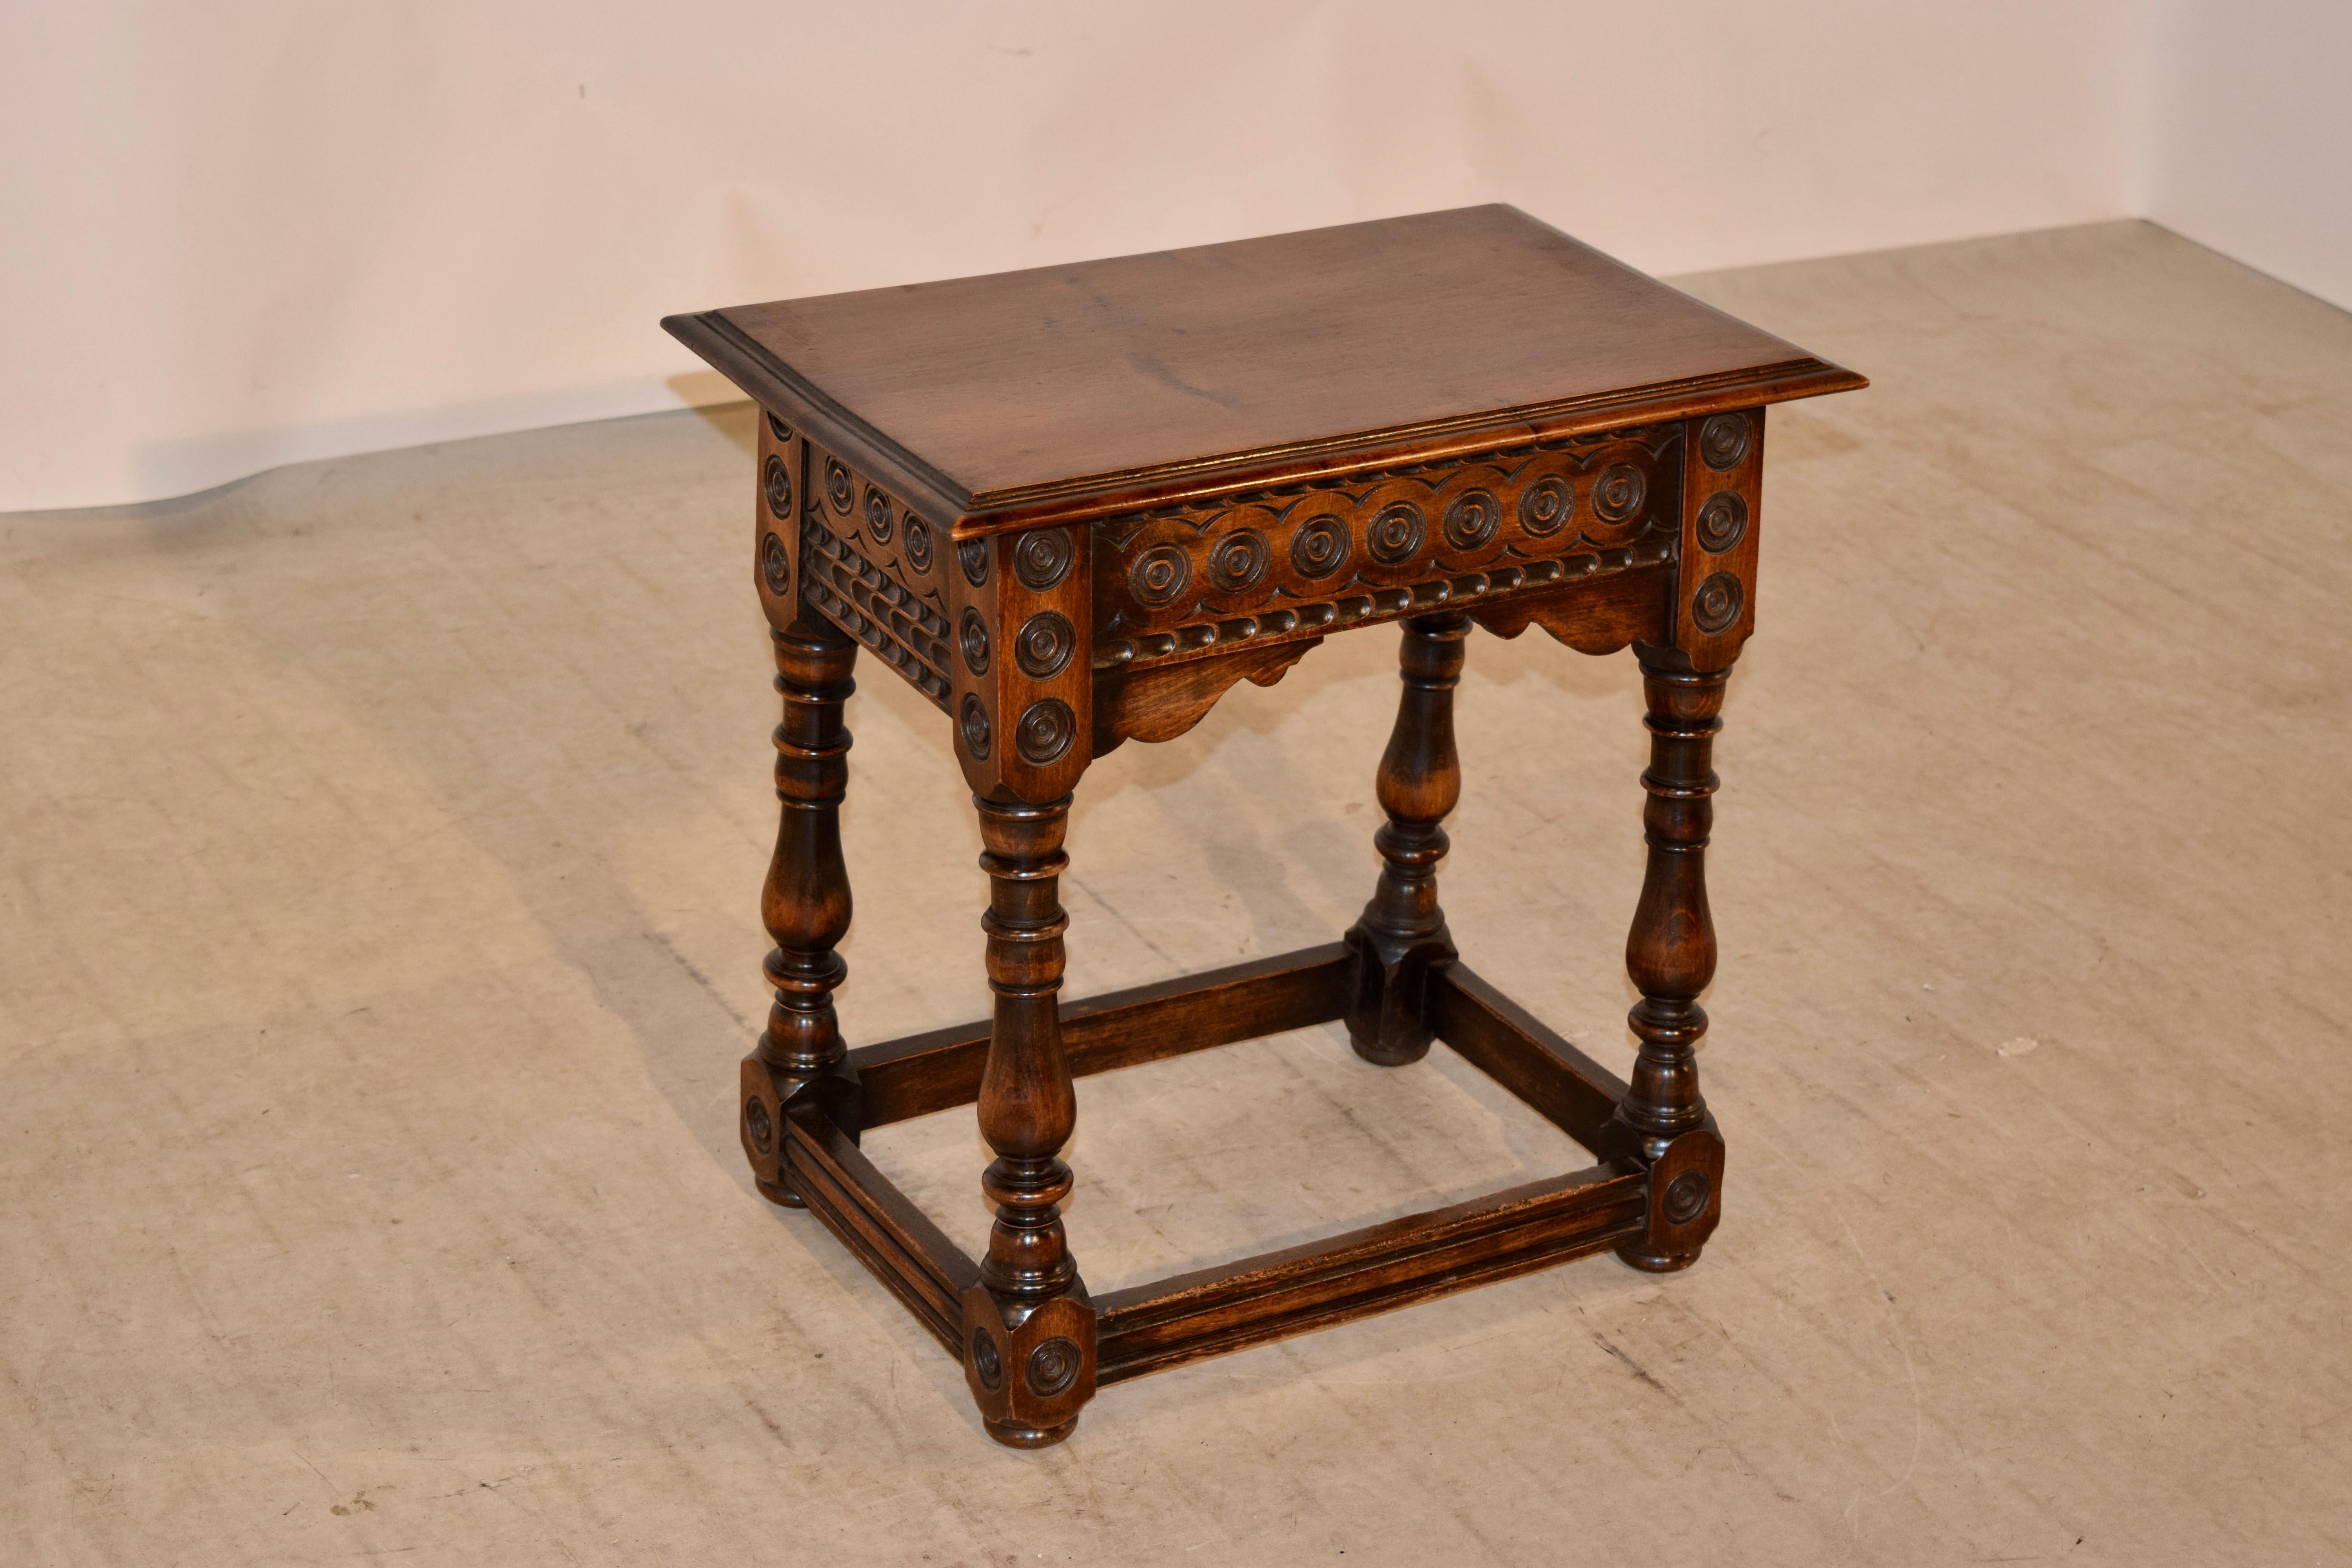 19th century hand carved decorated stool from France. The top has a beveled edge and follows down to a lovely hand carved decorated apron with hand scalloped brackets. The stool has wonderfully hand-turned and splayed legs joined by routed decorated